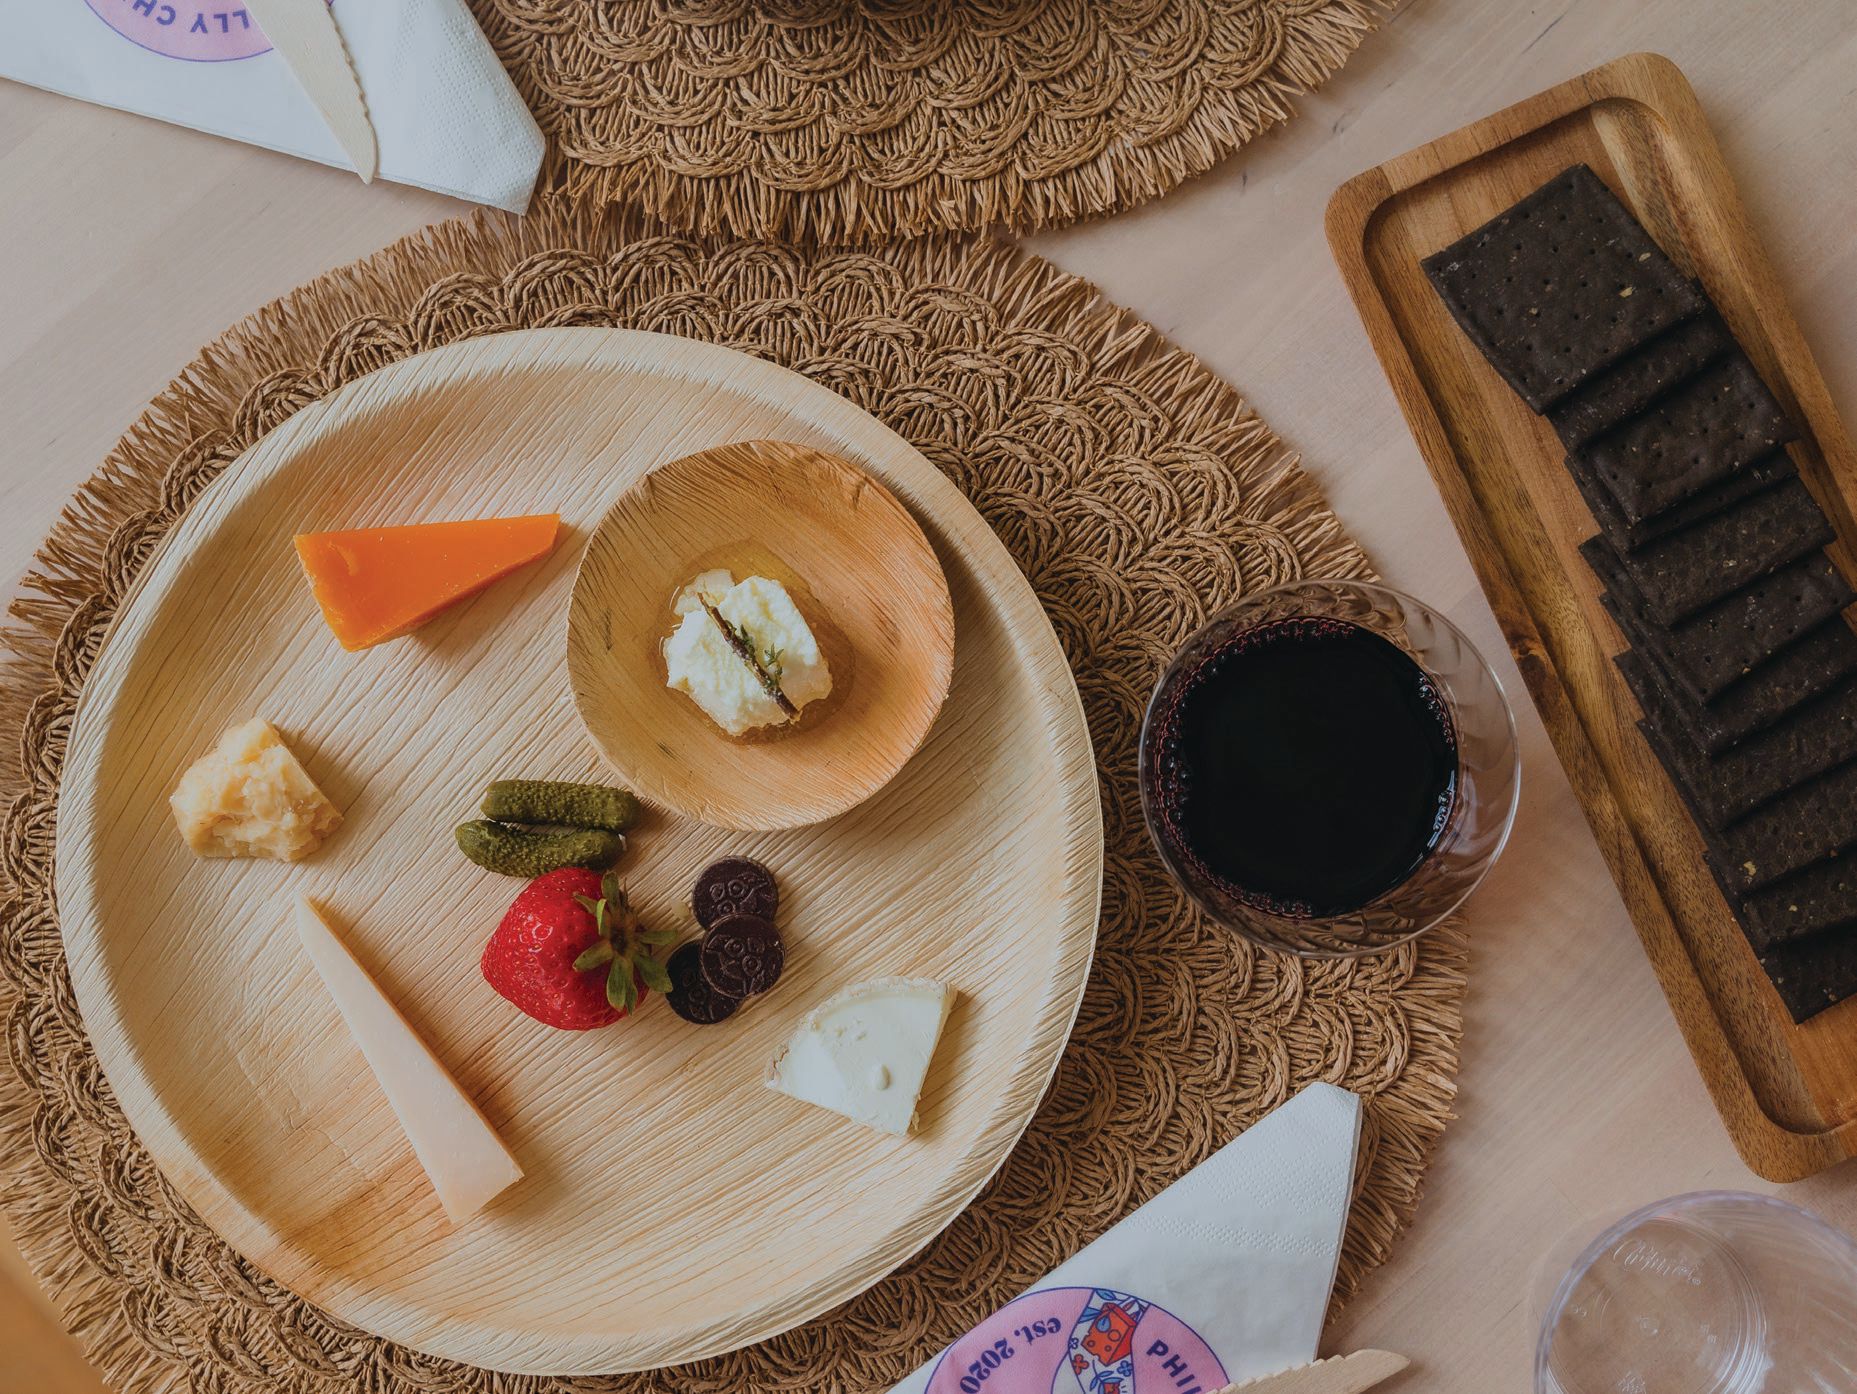 Become an expert cheese board maker at one of the Philly Cheese School classes this month, with seasonal and inventive flavor combinations. PHOTO BY: MAX MESTER